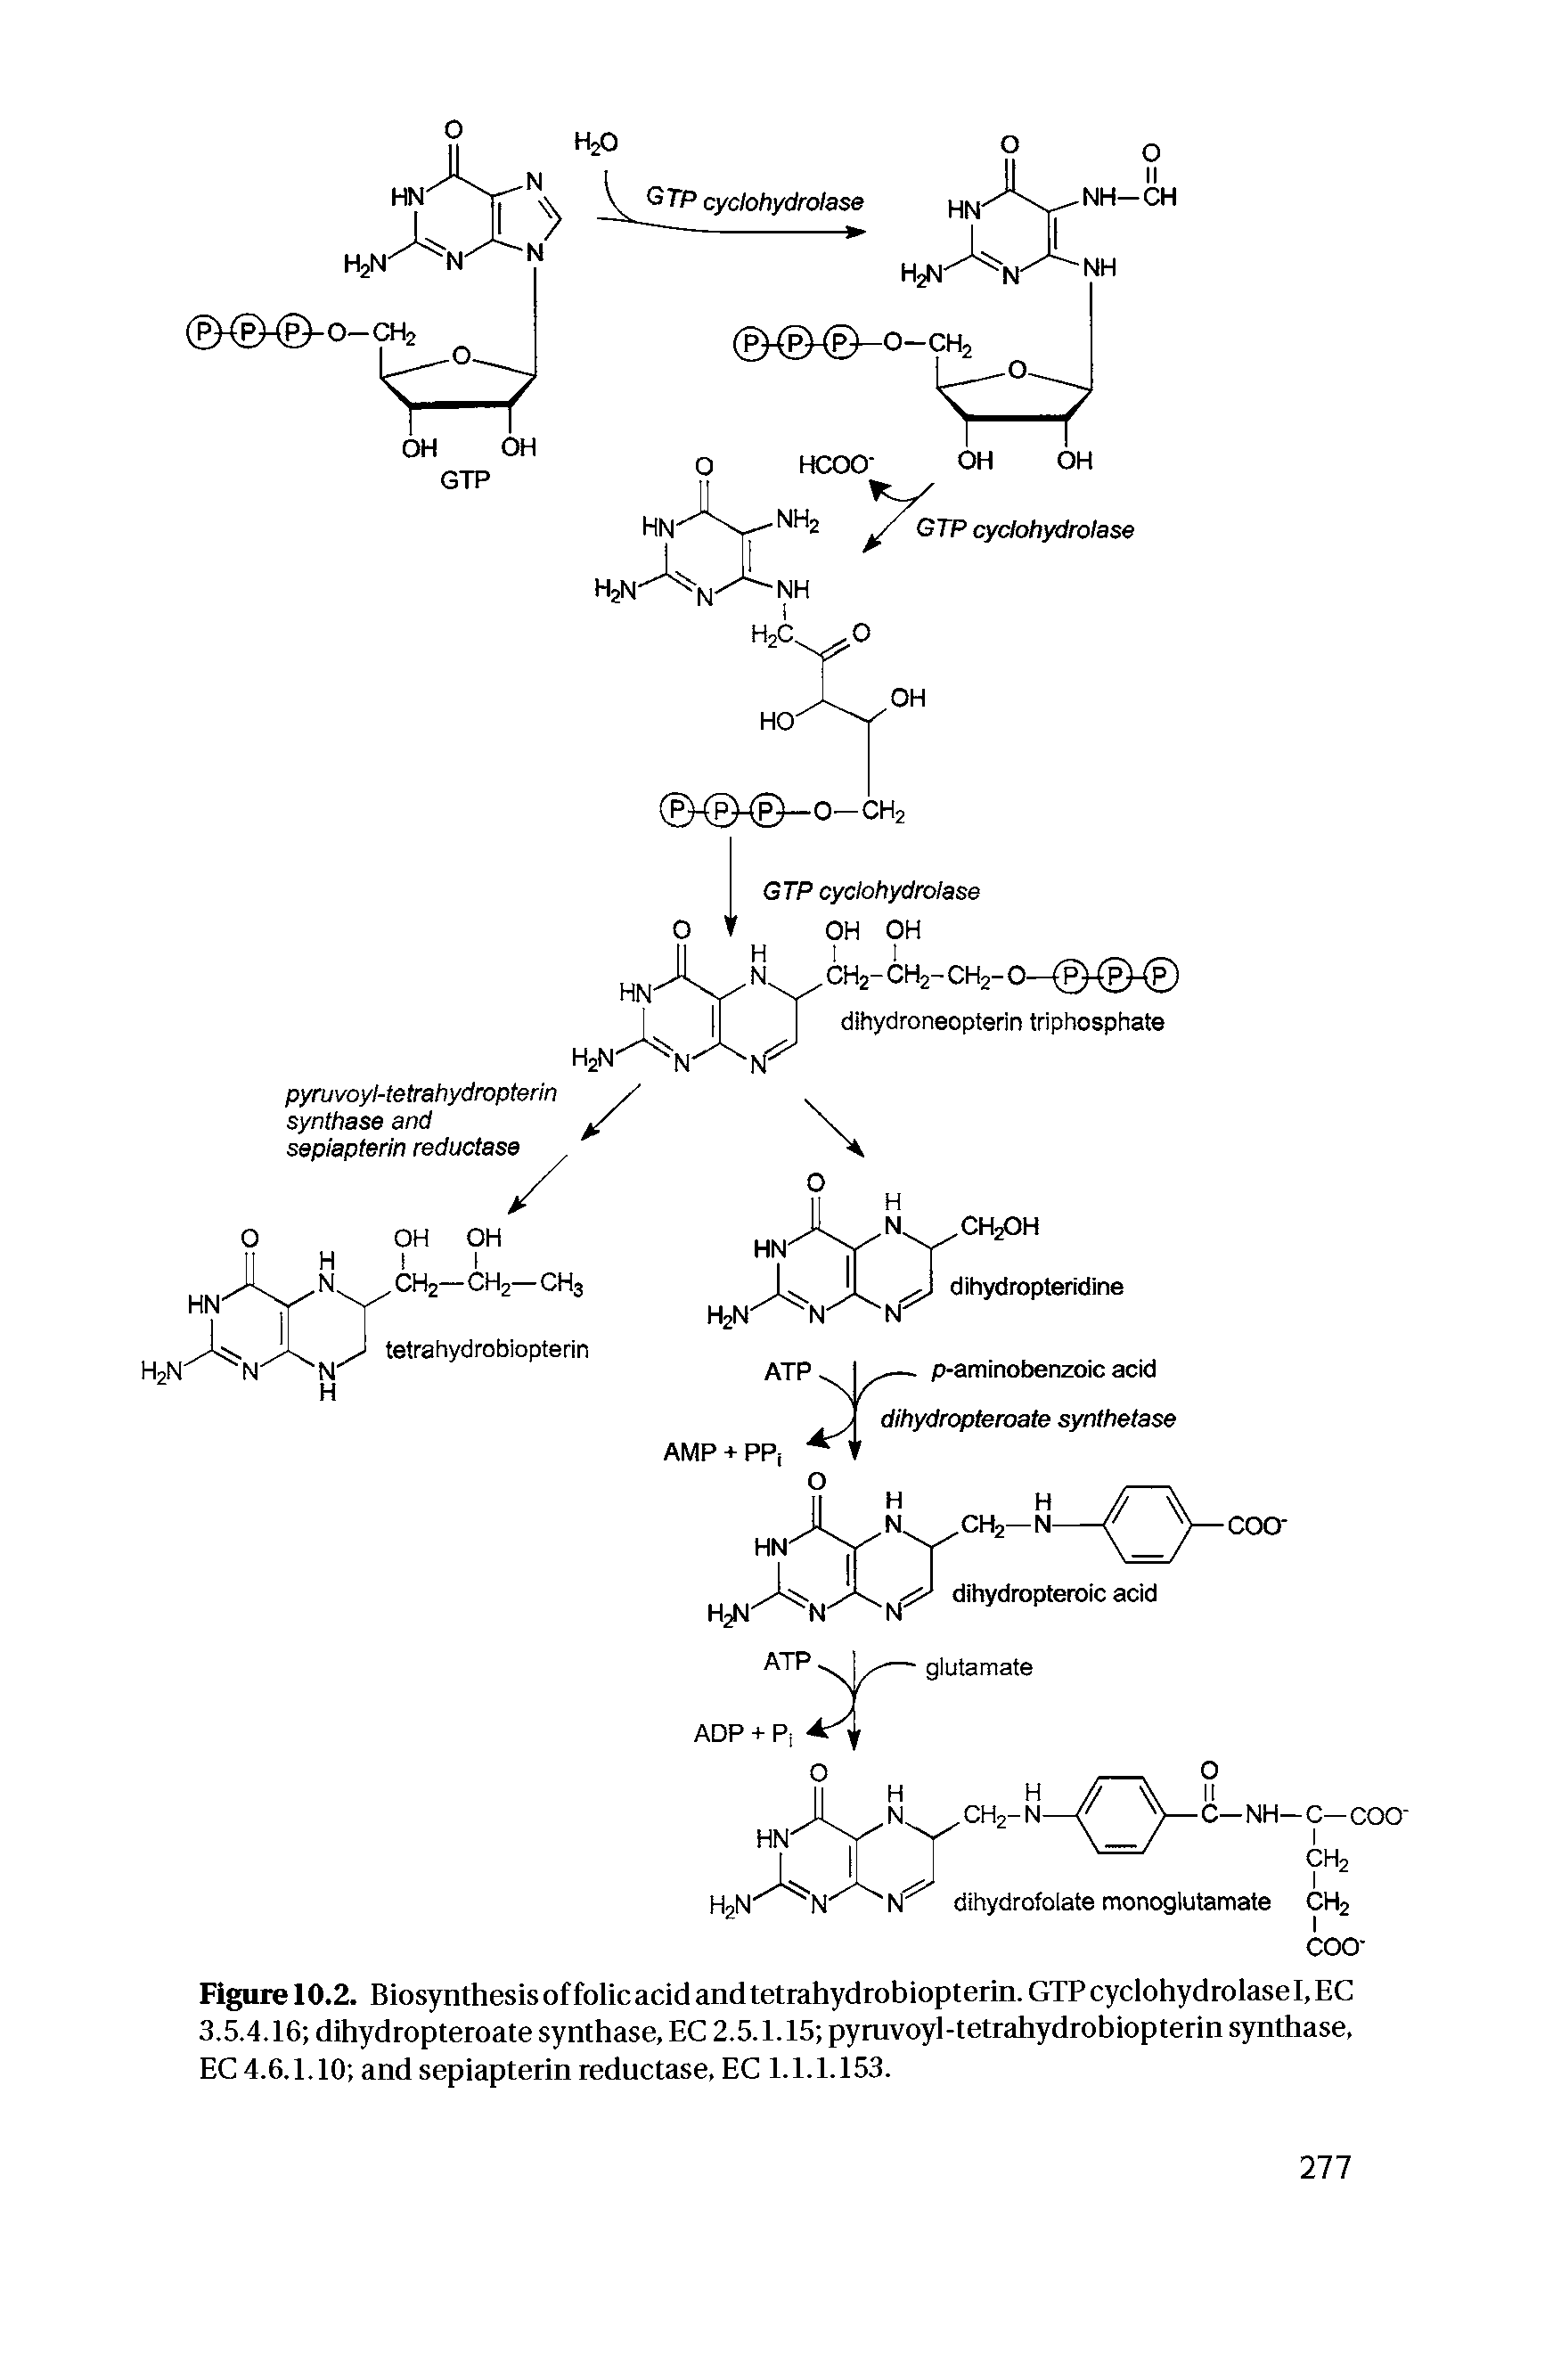 Figure 10.2. Biosynthesisoffolicacidandtetrahydrobiopterin.GTPcyclohydrolasel.EC 3.5.4.16 dihydropteroate synthase, EC 2.5.1.15 pyruvoyl-tetrahydrobiopterin synthase, EC 4.6.1.10 and sepiapterin reductase, EC 1.1.1.153.